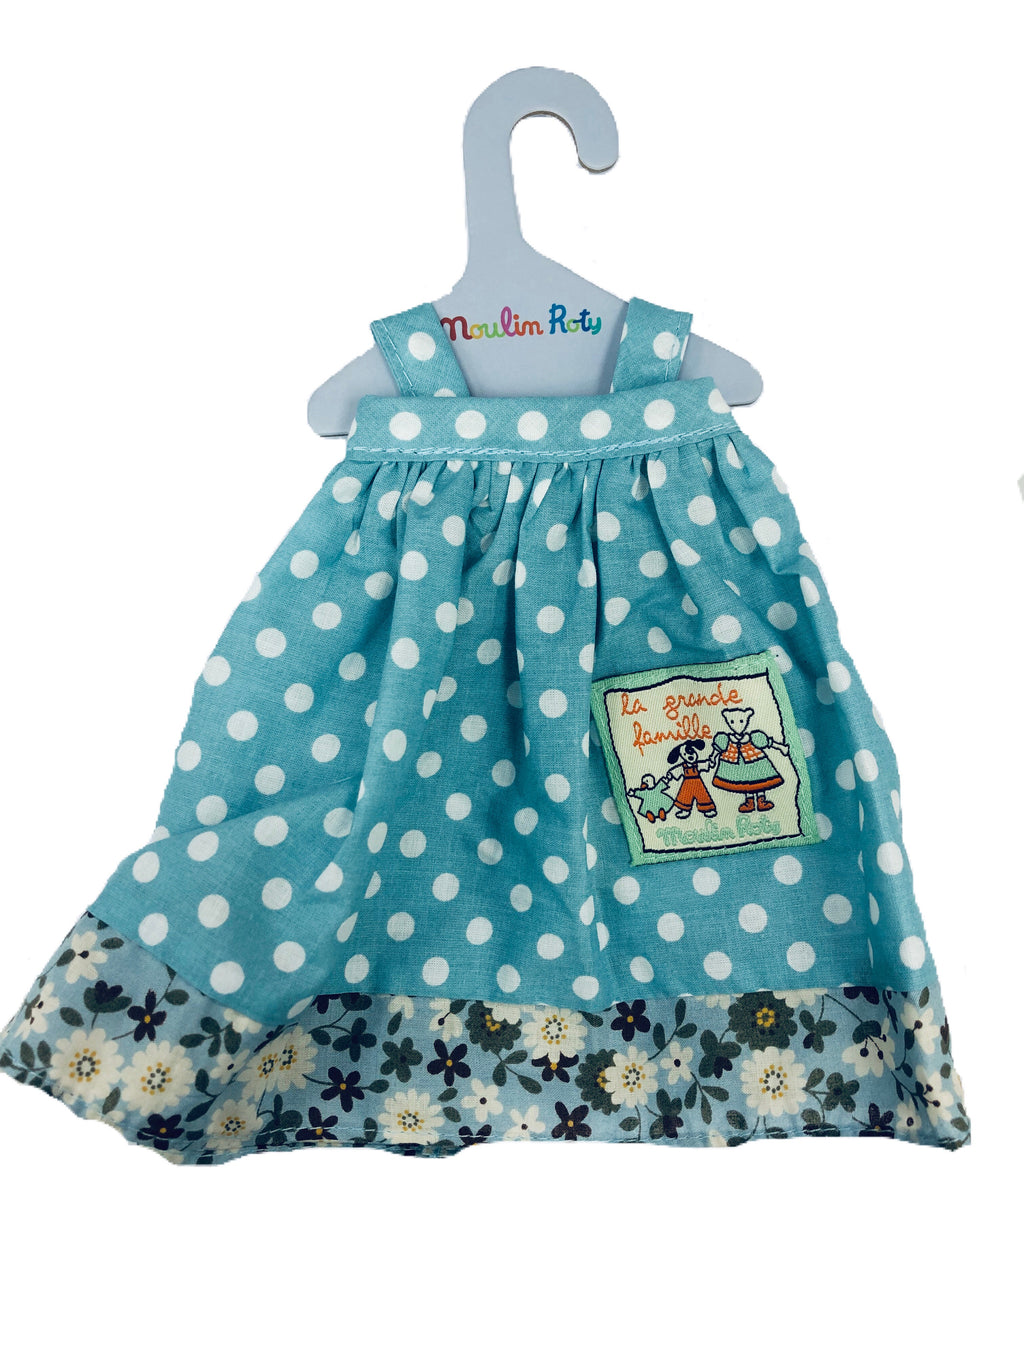 Moulin Roty | Cotton Doll Dress | Blue Polka Dot Apron Dress | Size: for 30cm tall plush animals and dolls | Age: 0+